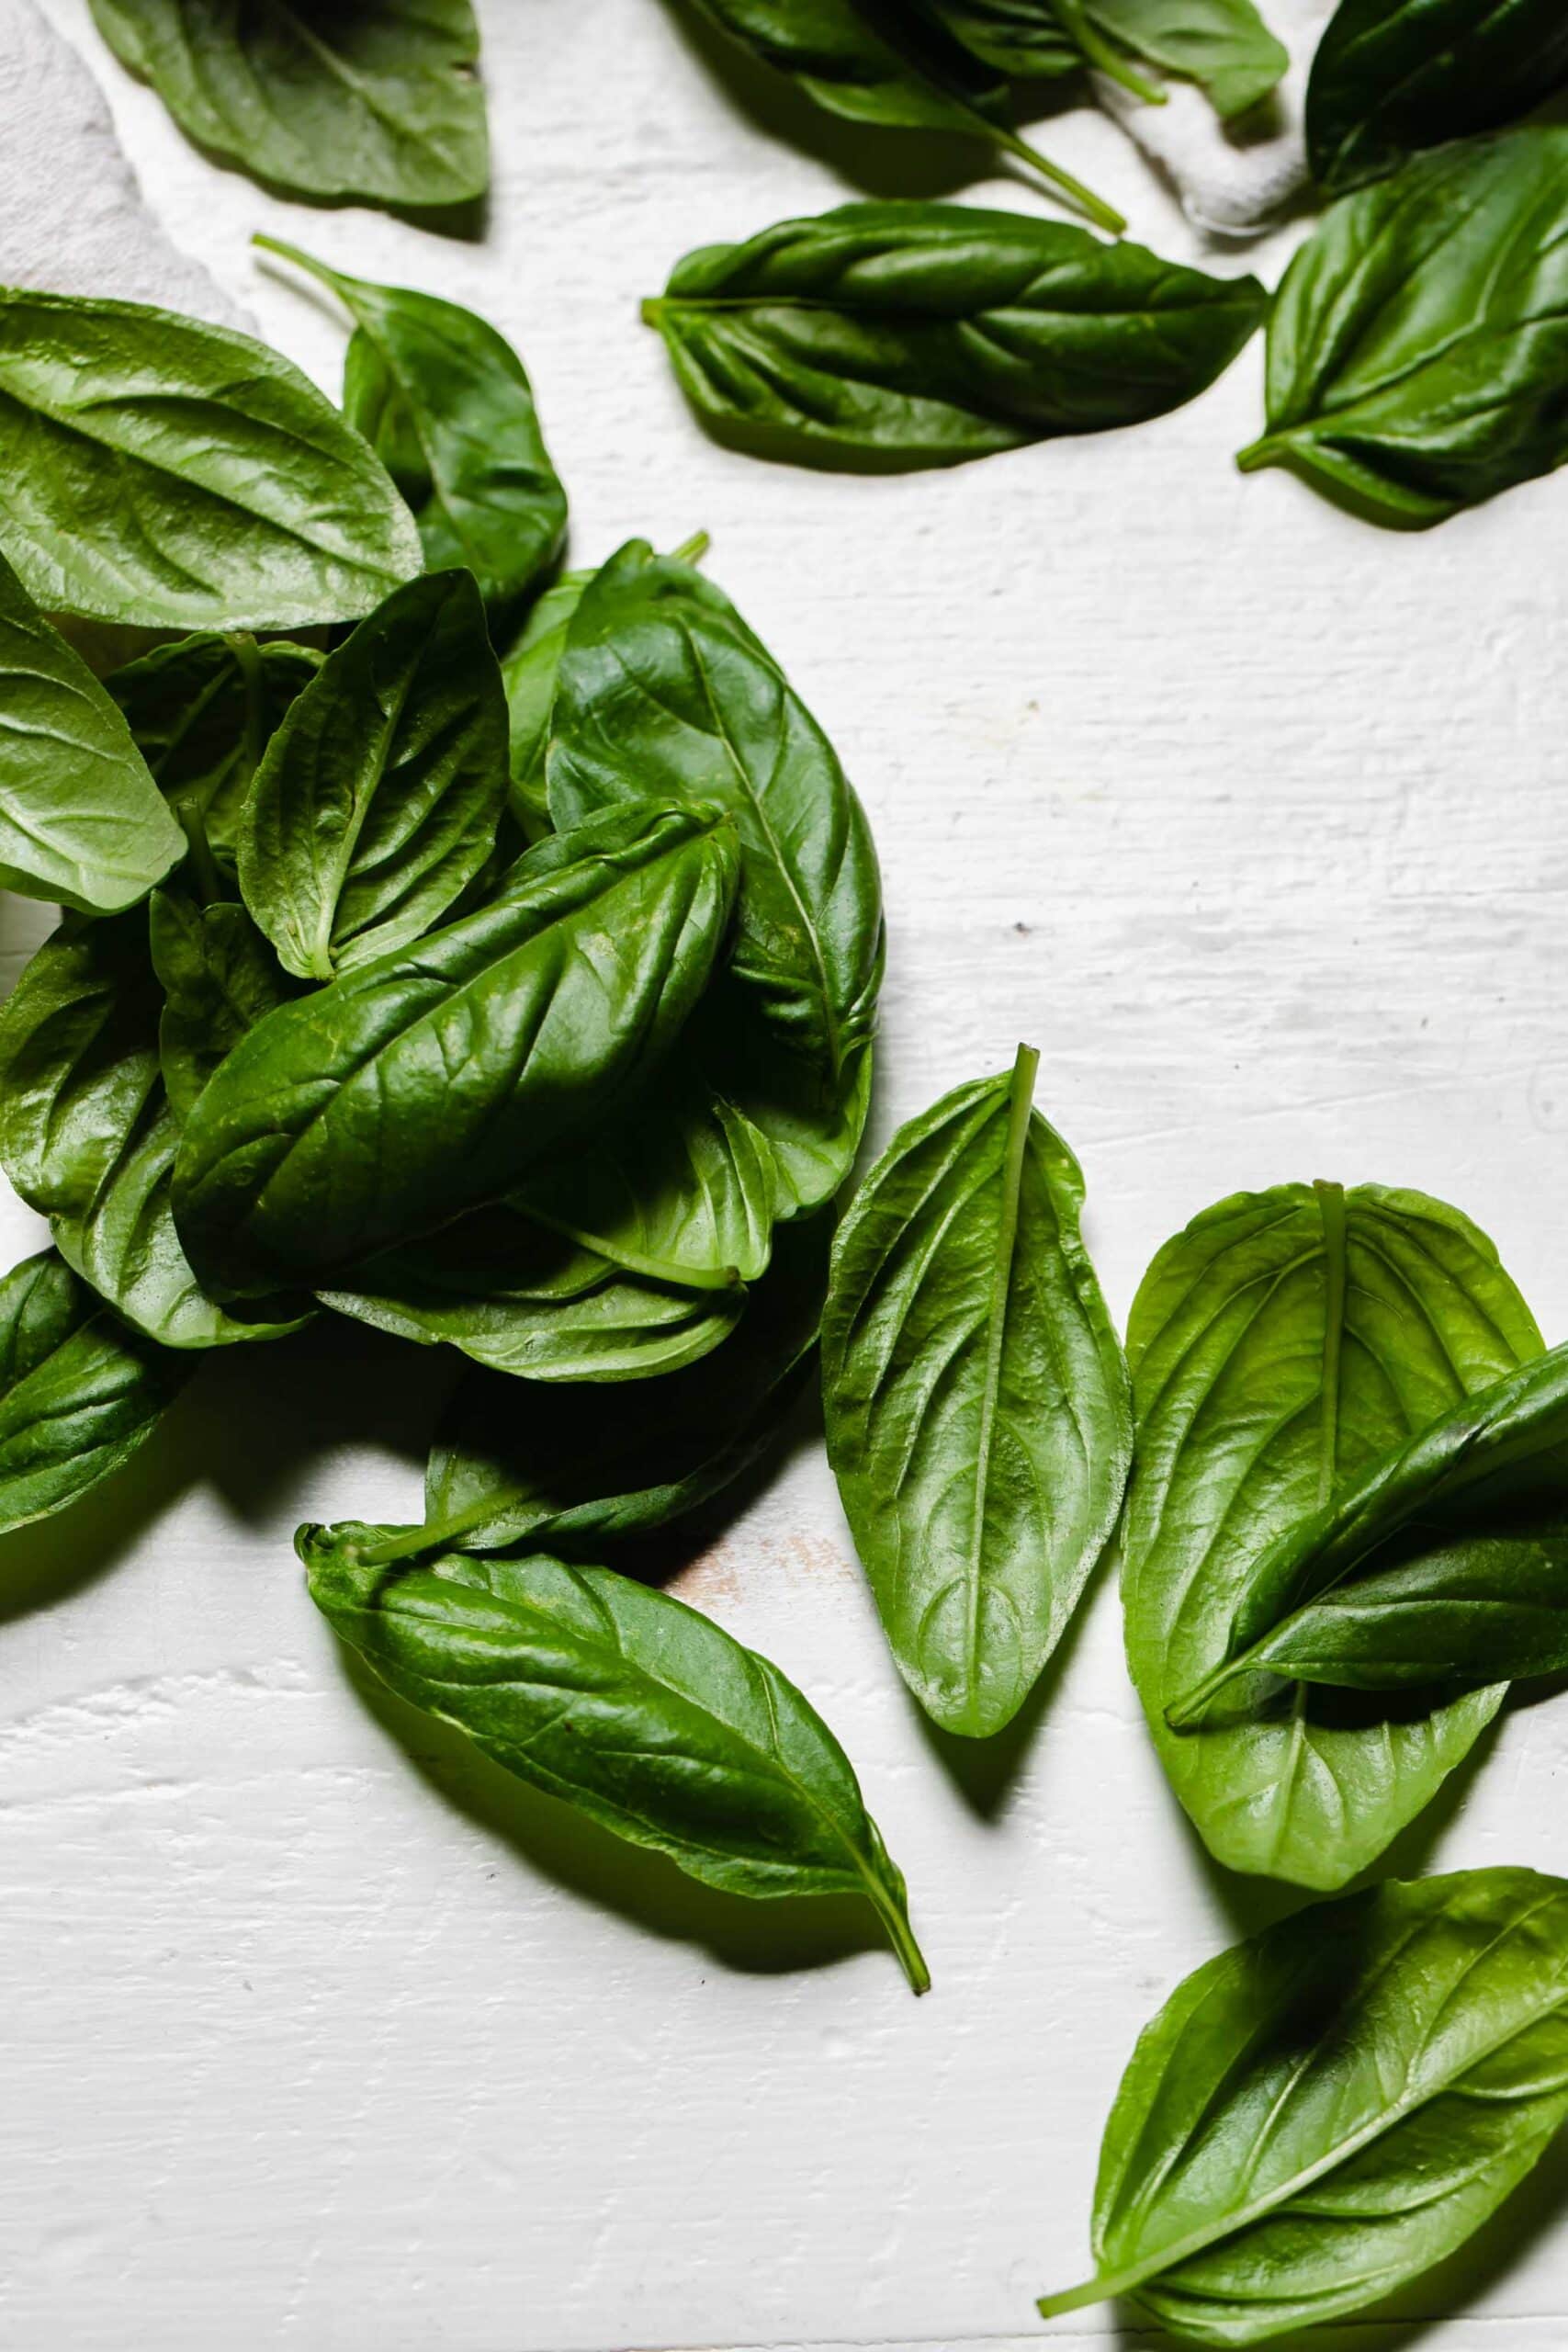 BASIL LEAVES ON COUNTER